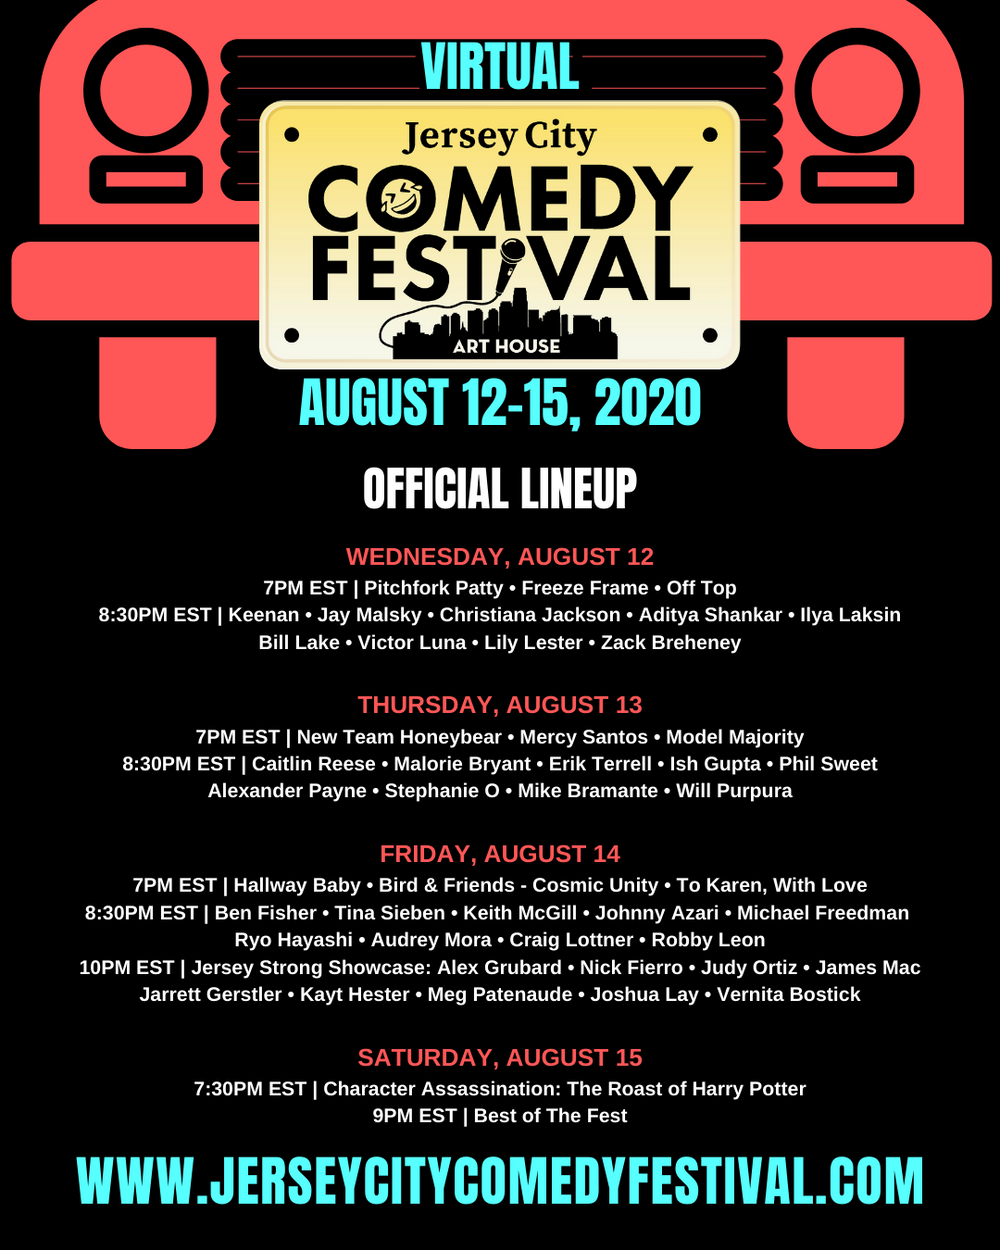 Virtual Jersey City Comedy Festival - August 12-15, 2020